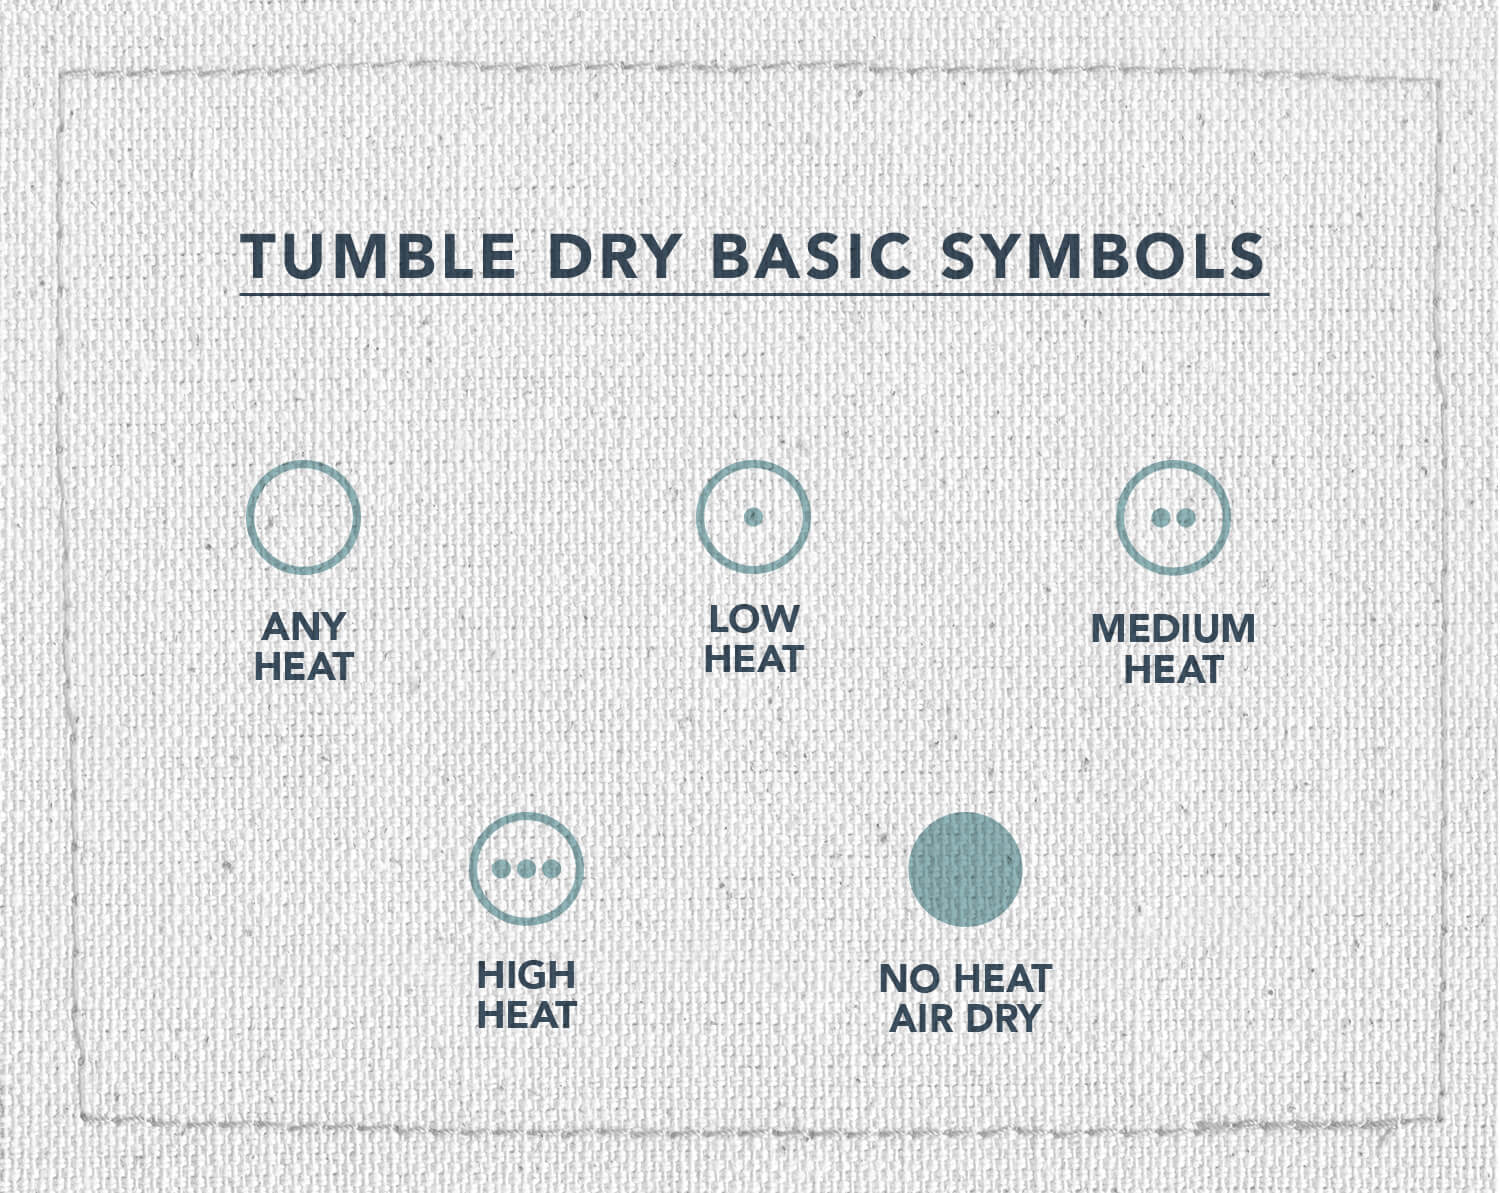 An infographic of three laundry care symbols, indicating what symbols indicate tumble dry instructions, any heat, low heat, medium heat, high heat, and no heat air dray